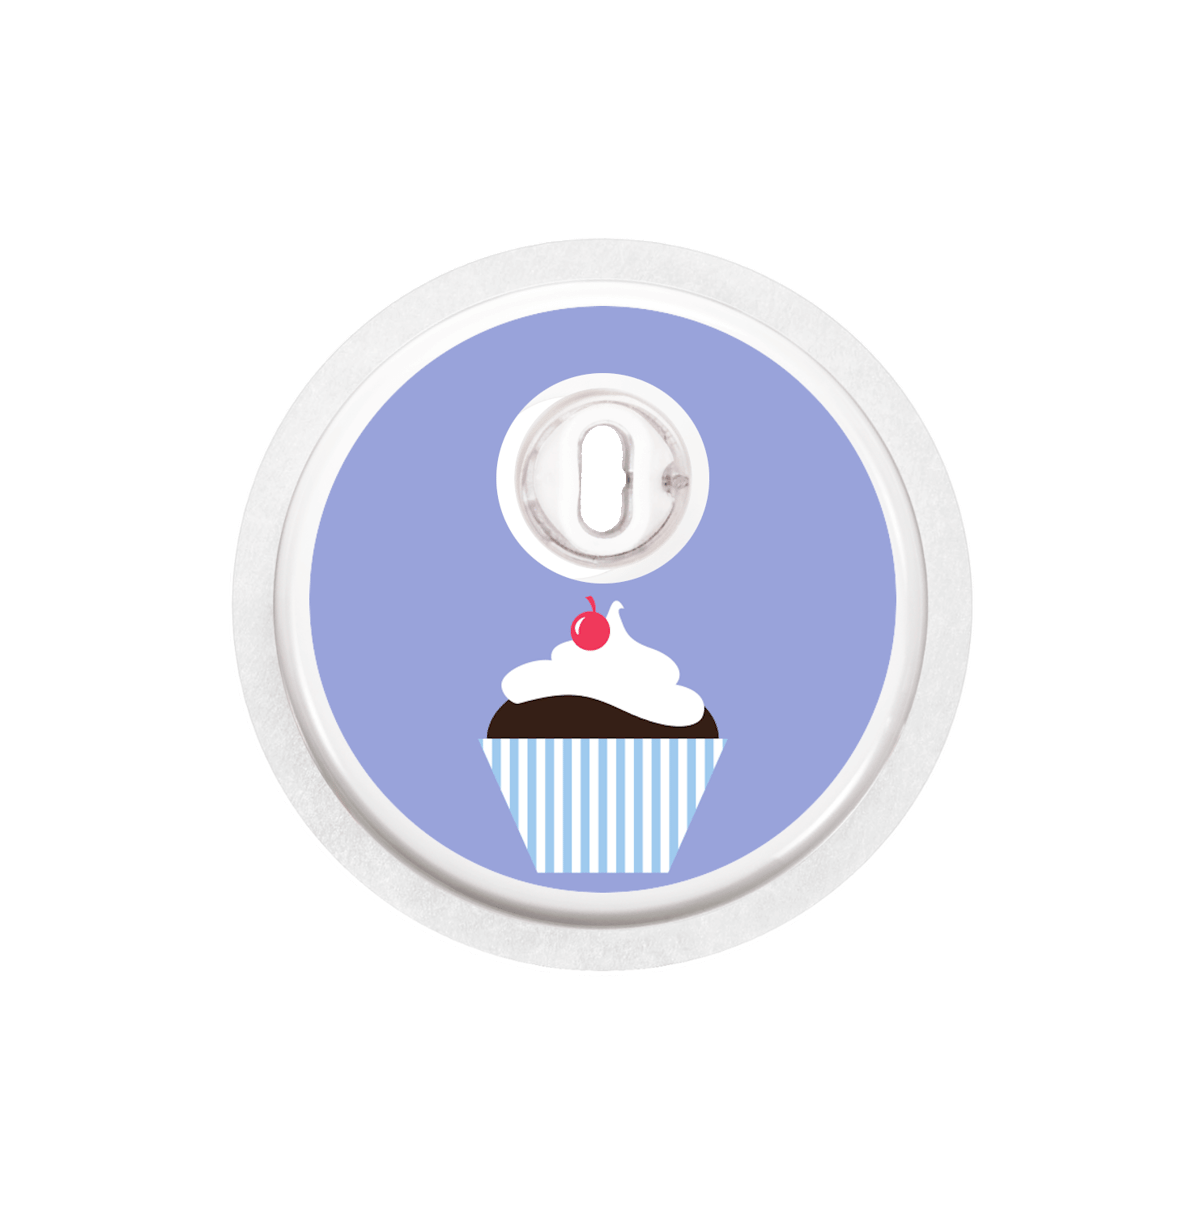 https://assets.bigcartel.com/product_images/341310655/freestyle-libre-3-sticker-cupcake-blue.png?auto=format&fit=max&w=1200